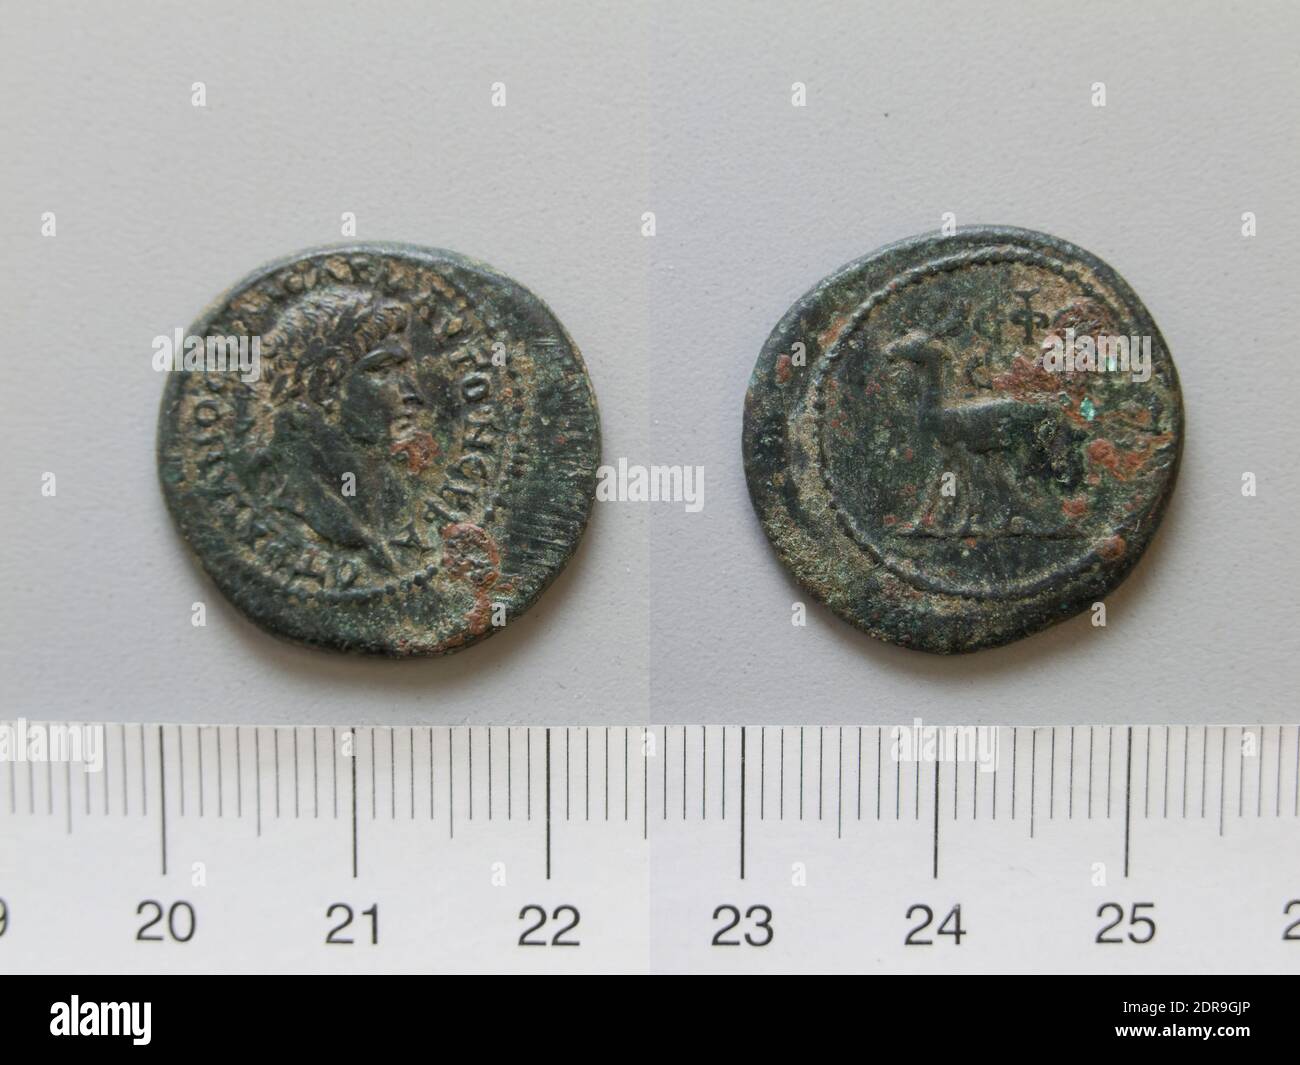 Ruler: Trajan, Emperor of Rome, A.D. 53–117, ruled 98–117, Mint: Ephesus, Coin of Trajan, Emperor of Rome from Ephesus, 98–117, Bronze, 5.52 g, 12:00, 23.5 mm, Made in Ephesus, Ionia, Greek, 1st–2nd century A.D., Numismatics Stock Photo